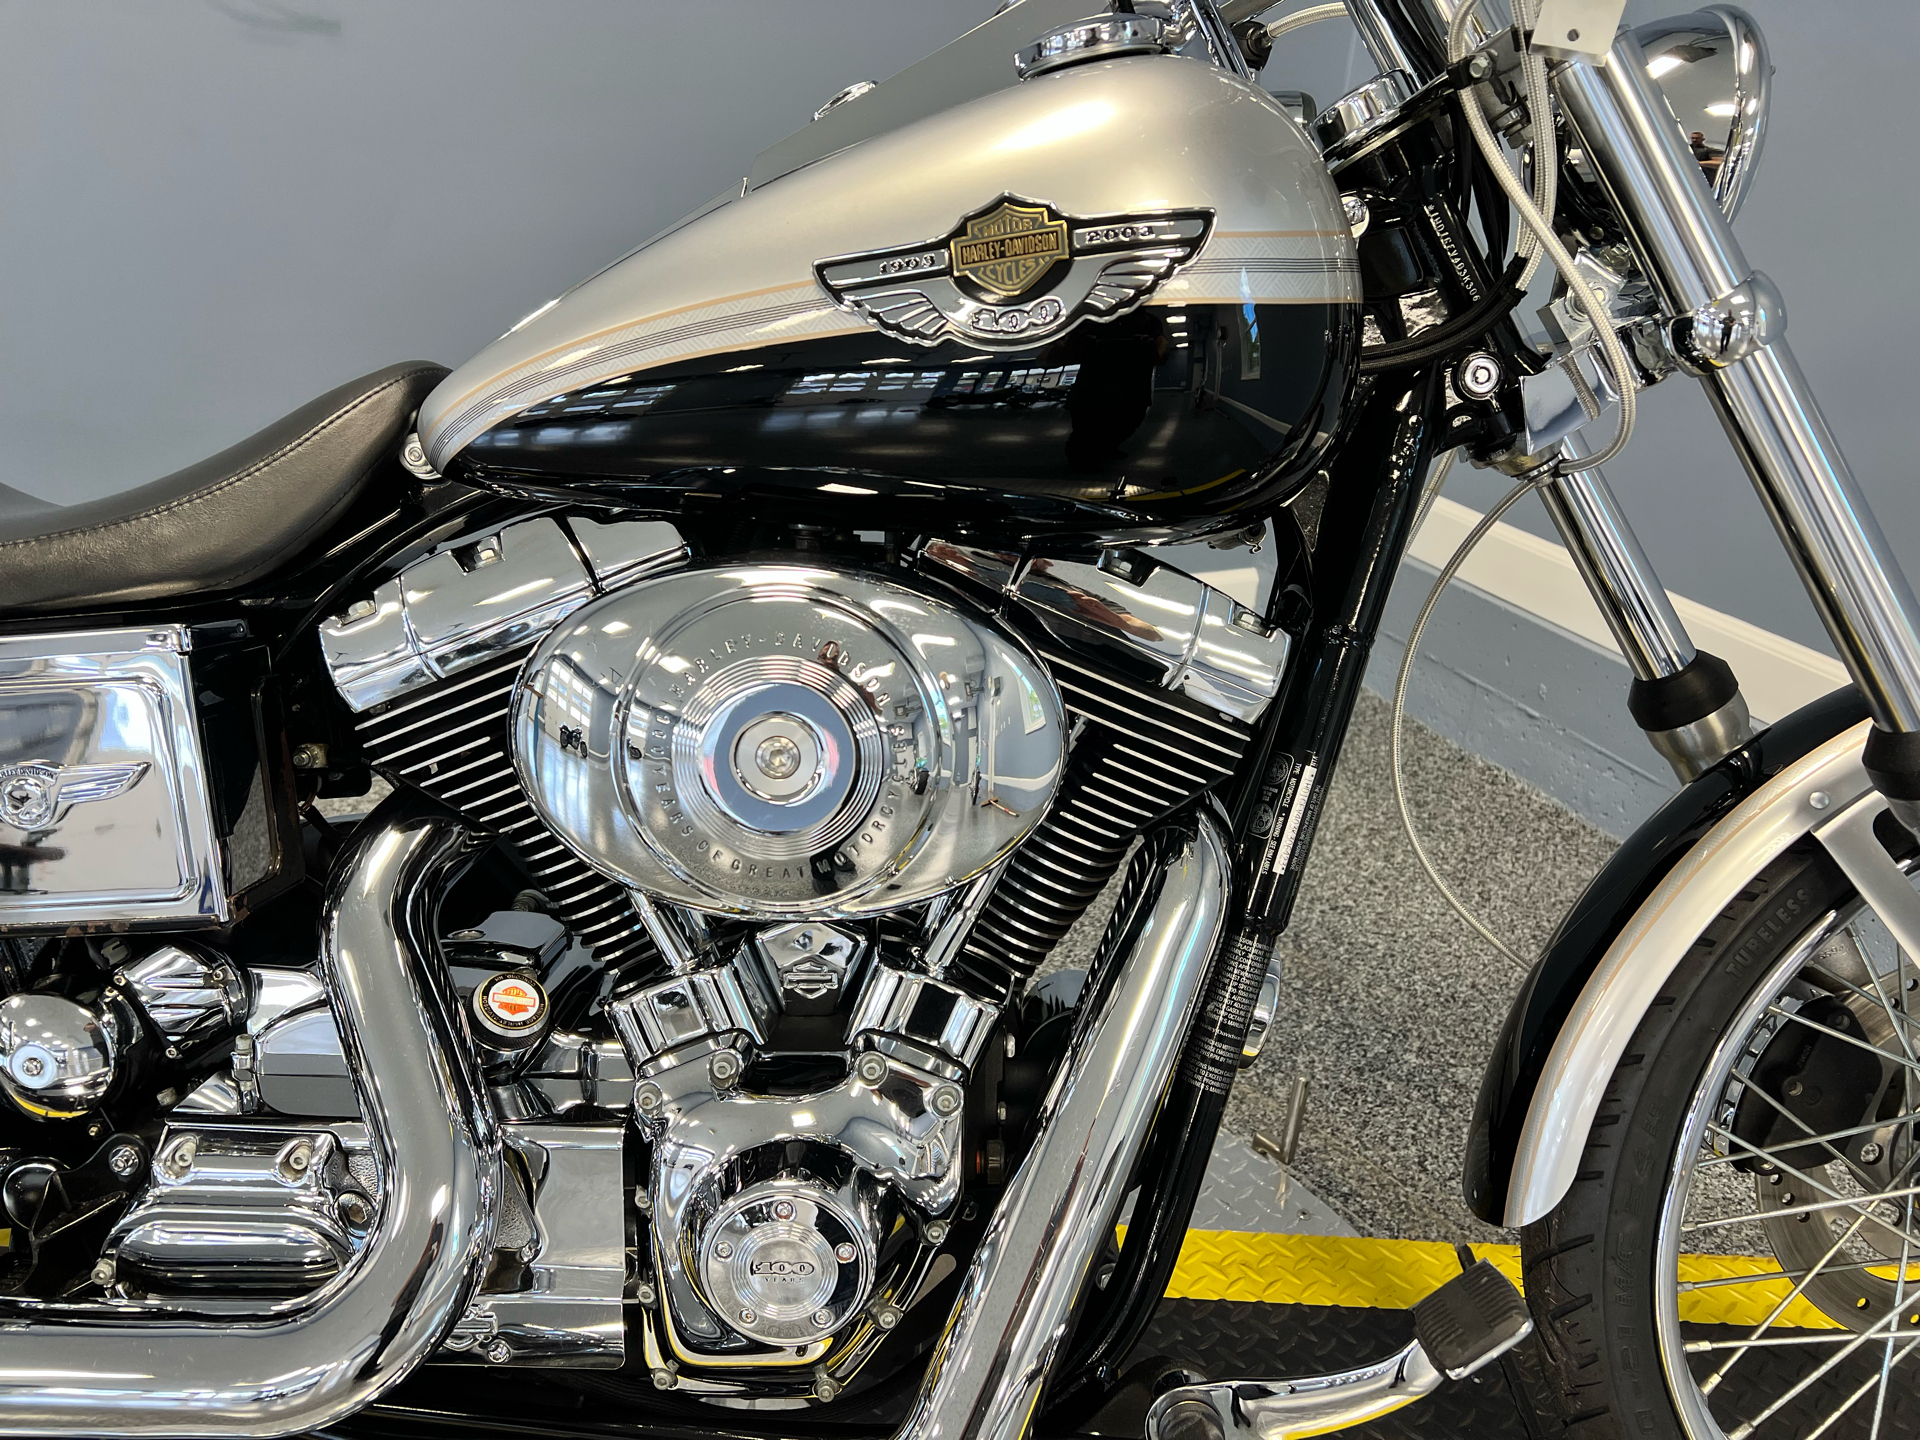 2003 Harley-Davidson FXDWG Dyna Wide Glide® in Meredith, New Hampshire - Photo 2